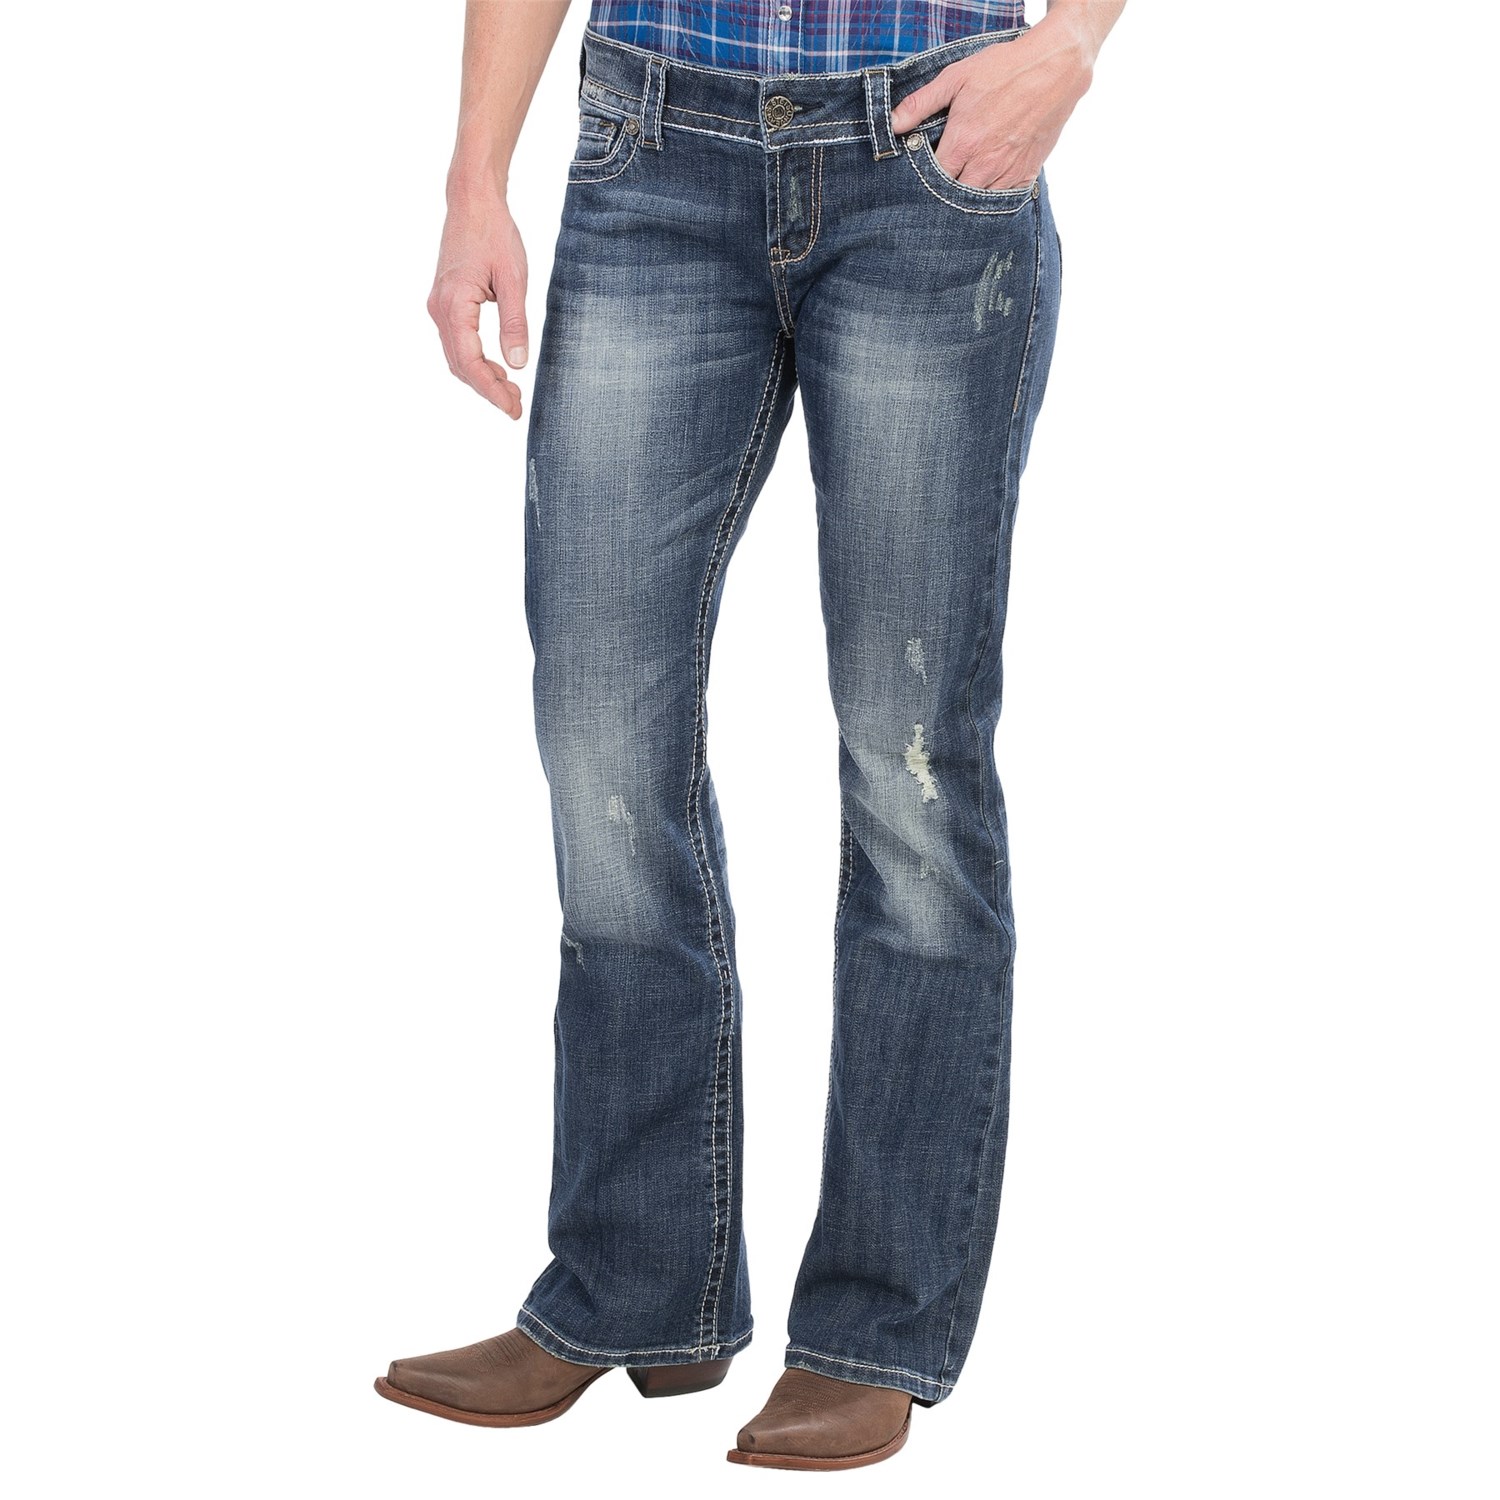 Stetson Flap Pocket Jeans (For Women) - Save 74%